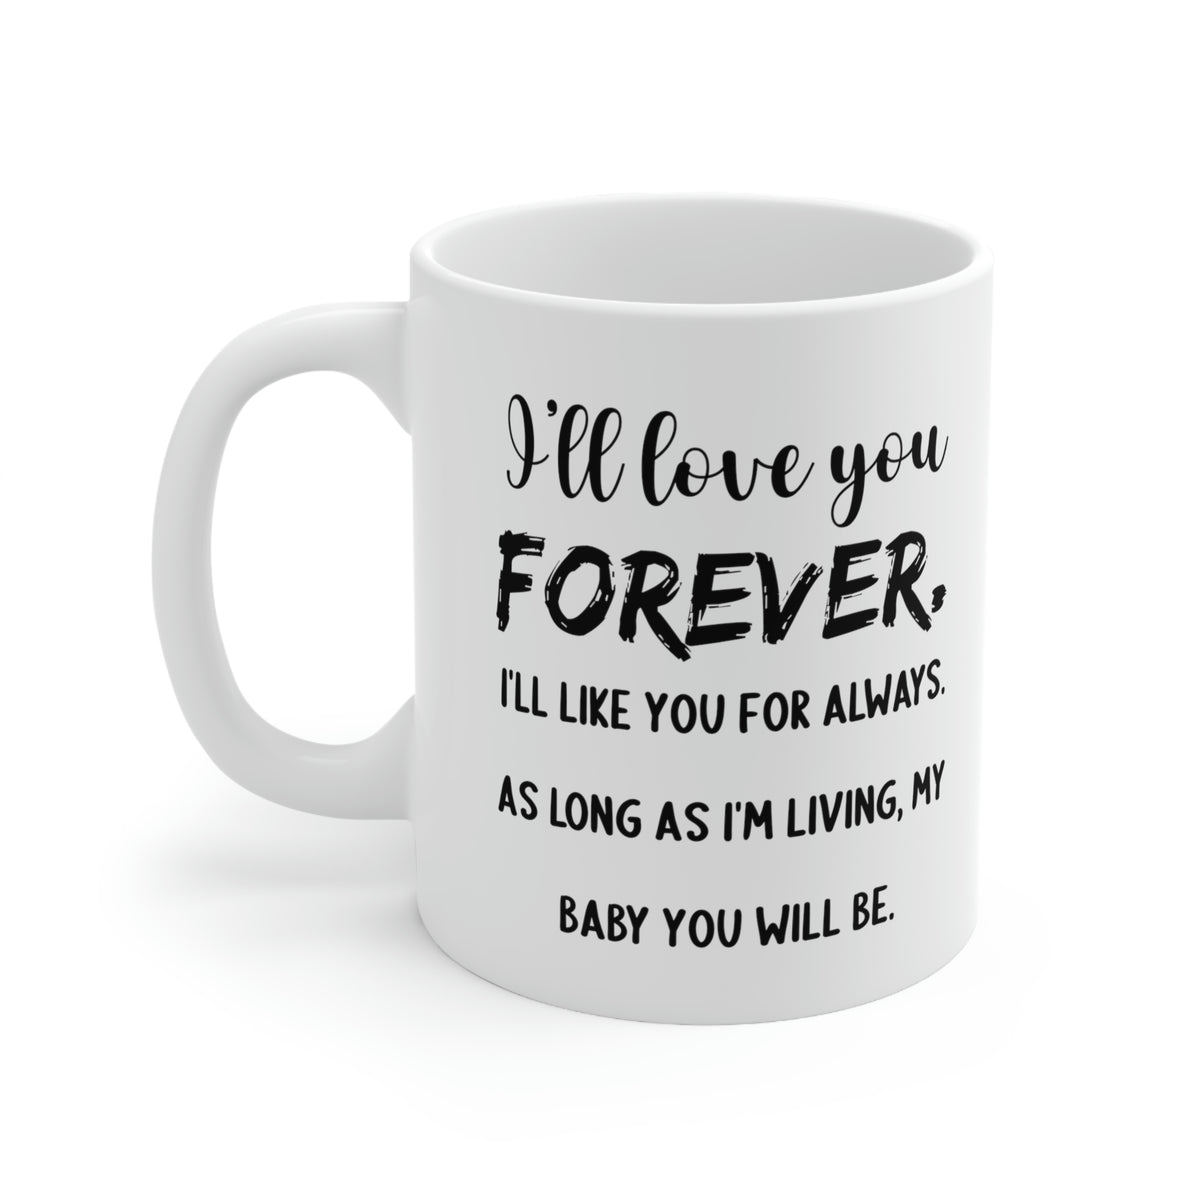 Funny Mother Son Mug - I’ll Love You Forever. I’ll Like You For Always. As Long As I’m Living, My Baby You Will Be. - 11oz Coffee Mugs - Best Inspirat